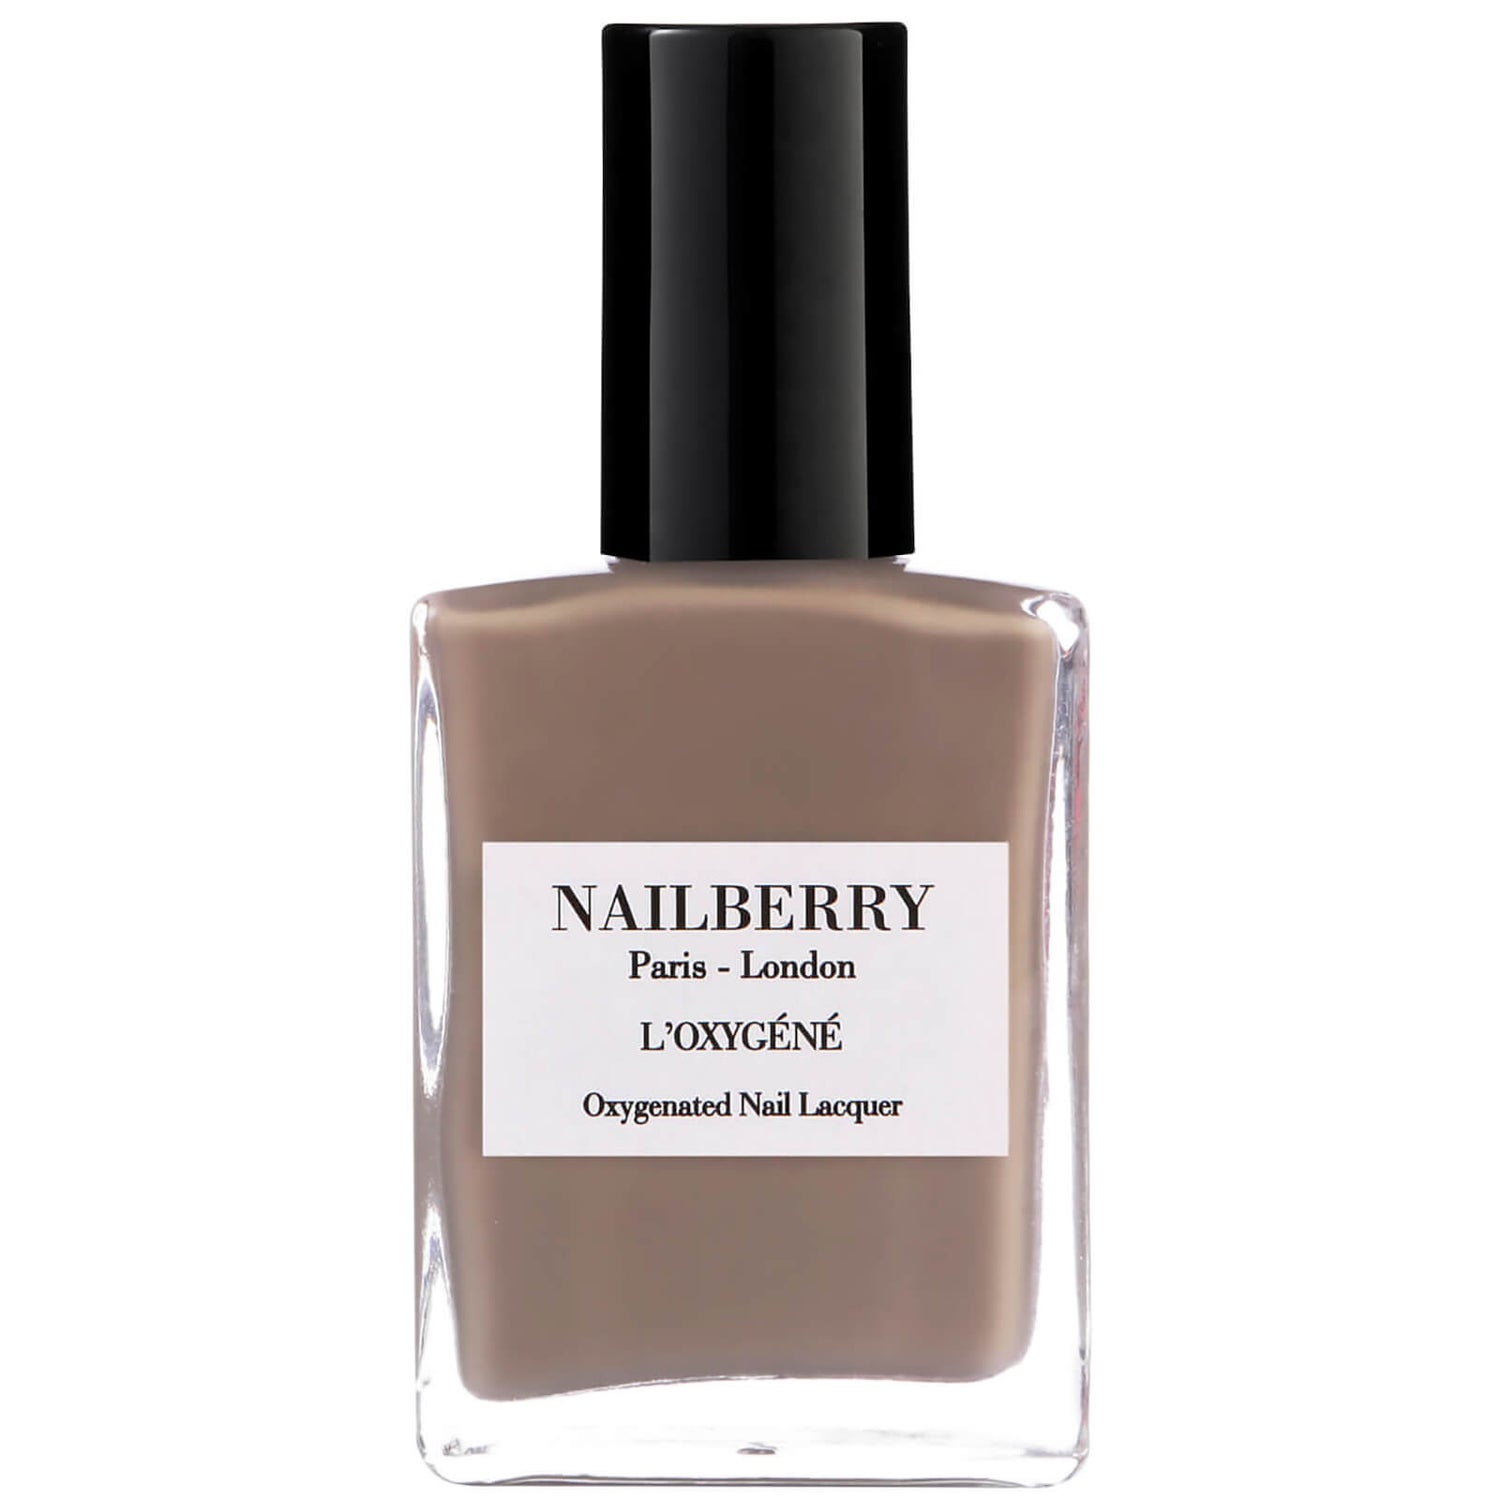 Nailberry Oxygene Nail Lacquer Mindful Grey (15ml) - LOOKFANTASTIC